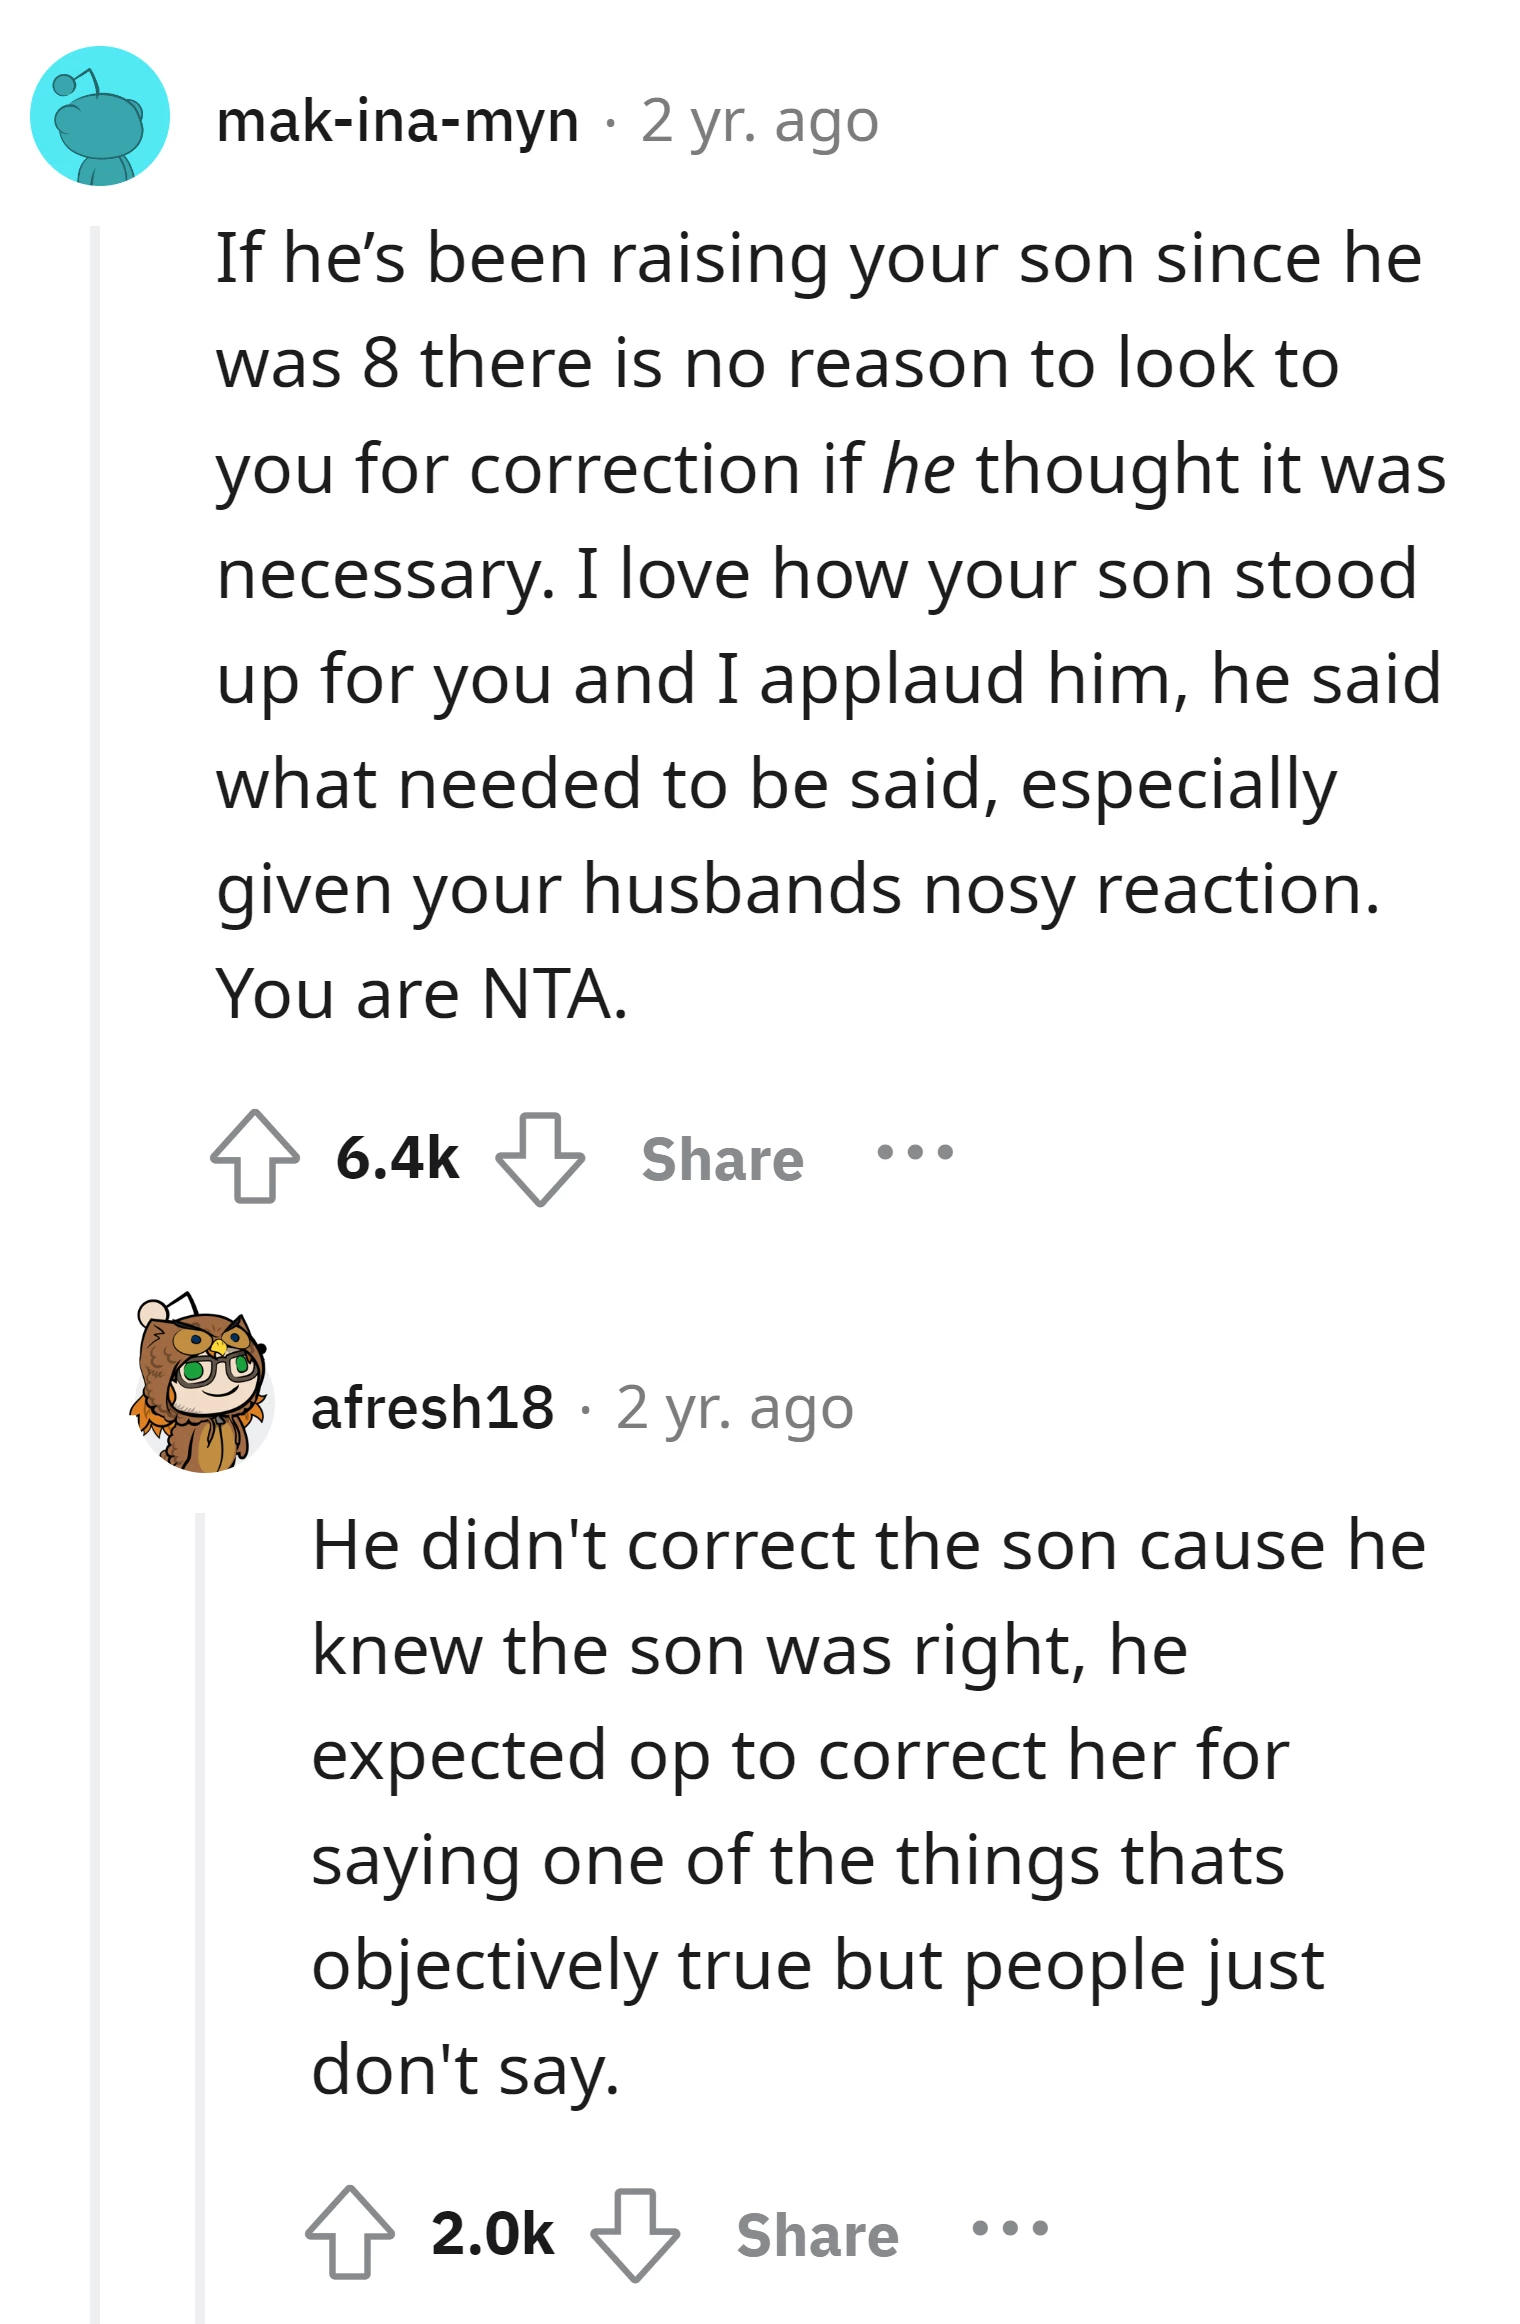 Commenter commends the son for standing up for the OP in response to the husband's nosy reaction